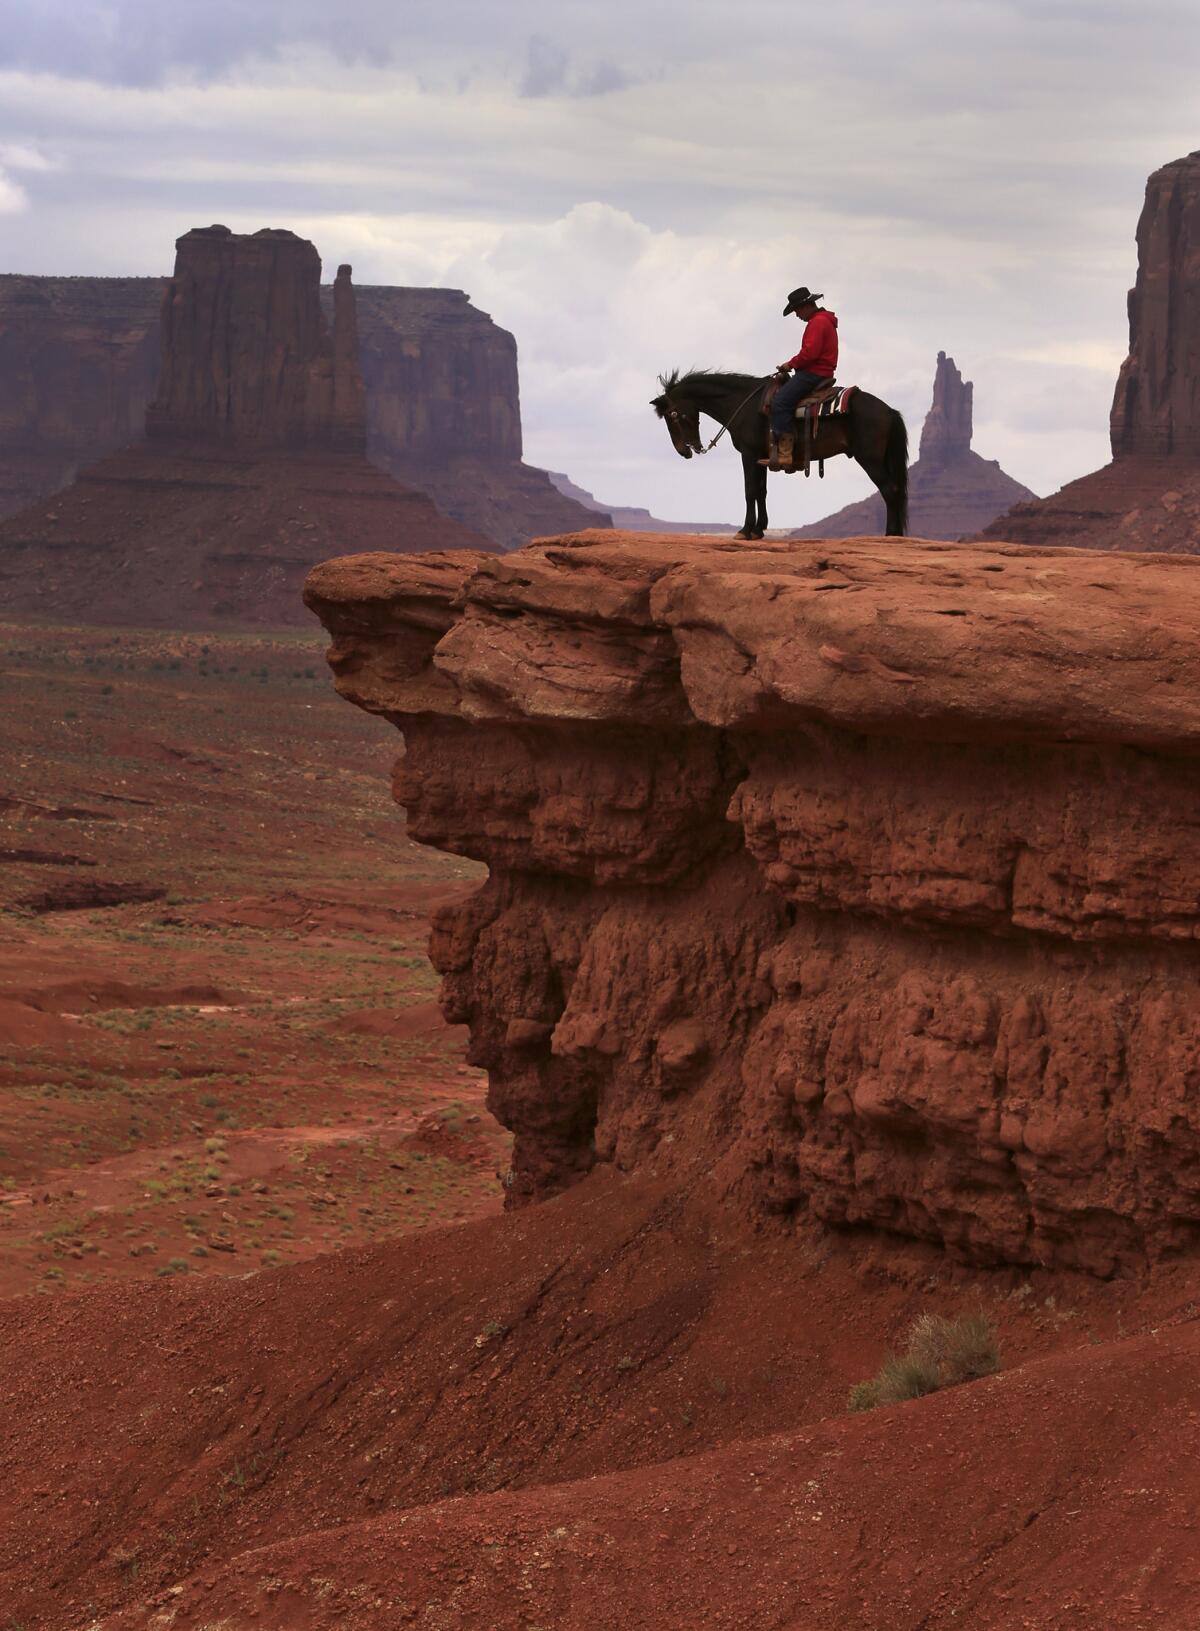 Navajo Adrian Jackson sits atop Pistol at John Ford's Point. Jackson charges $5 for tourists to sit on his horse and to take pictures with a backdrop that legendary movie director John Ford used in several of his epic westerns.